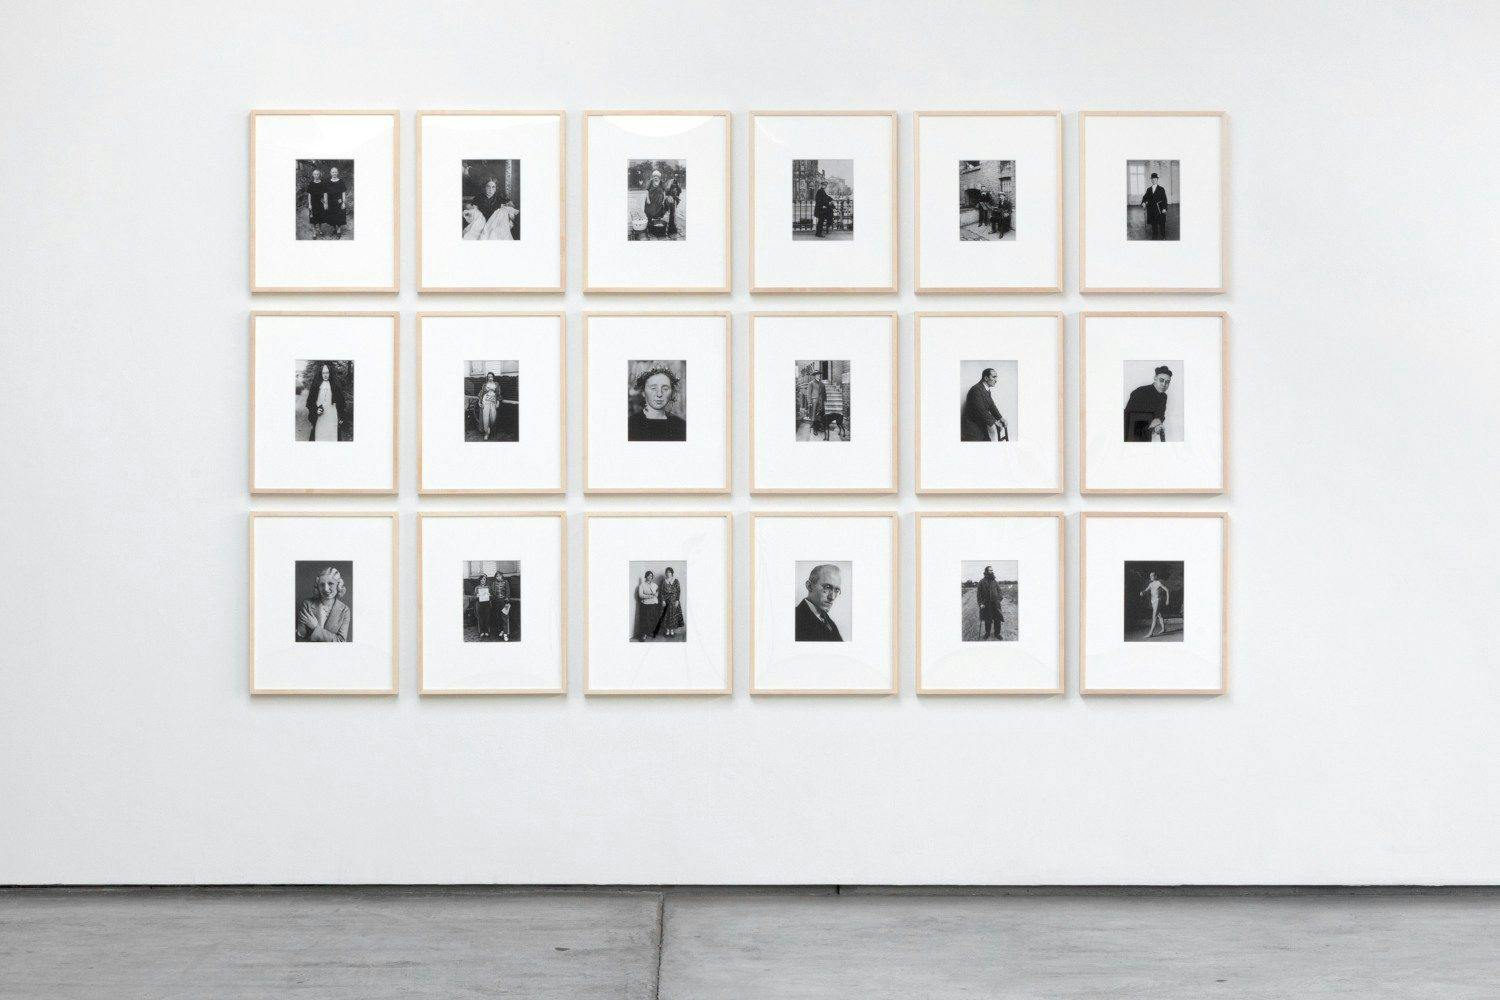 An artwork by Sherrie Levine, titled After August Sander: 1 - 18, from the Collection of the Pinault Collection, dated 2012.